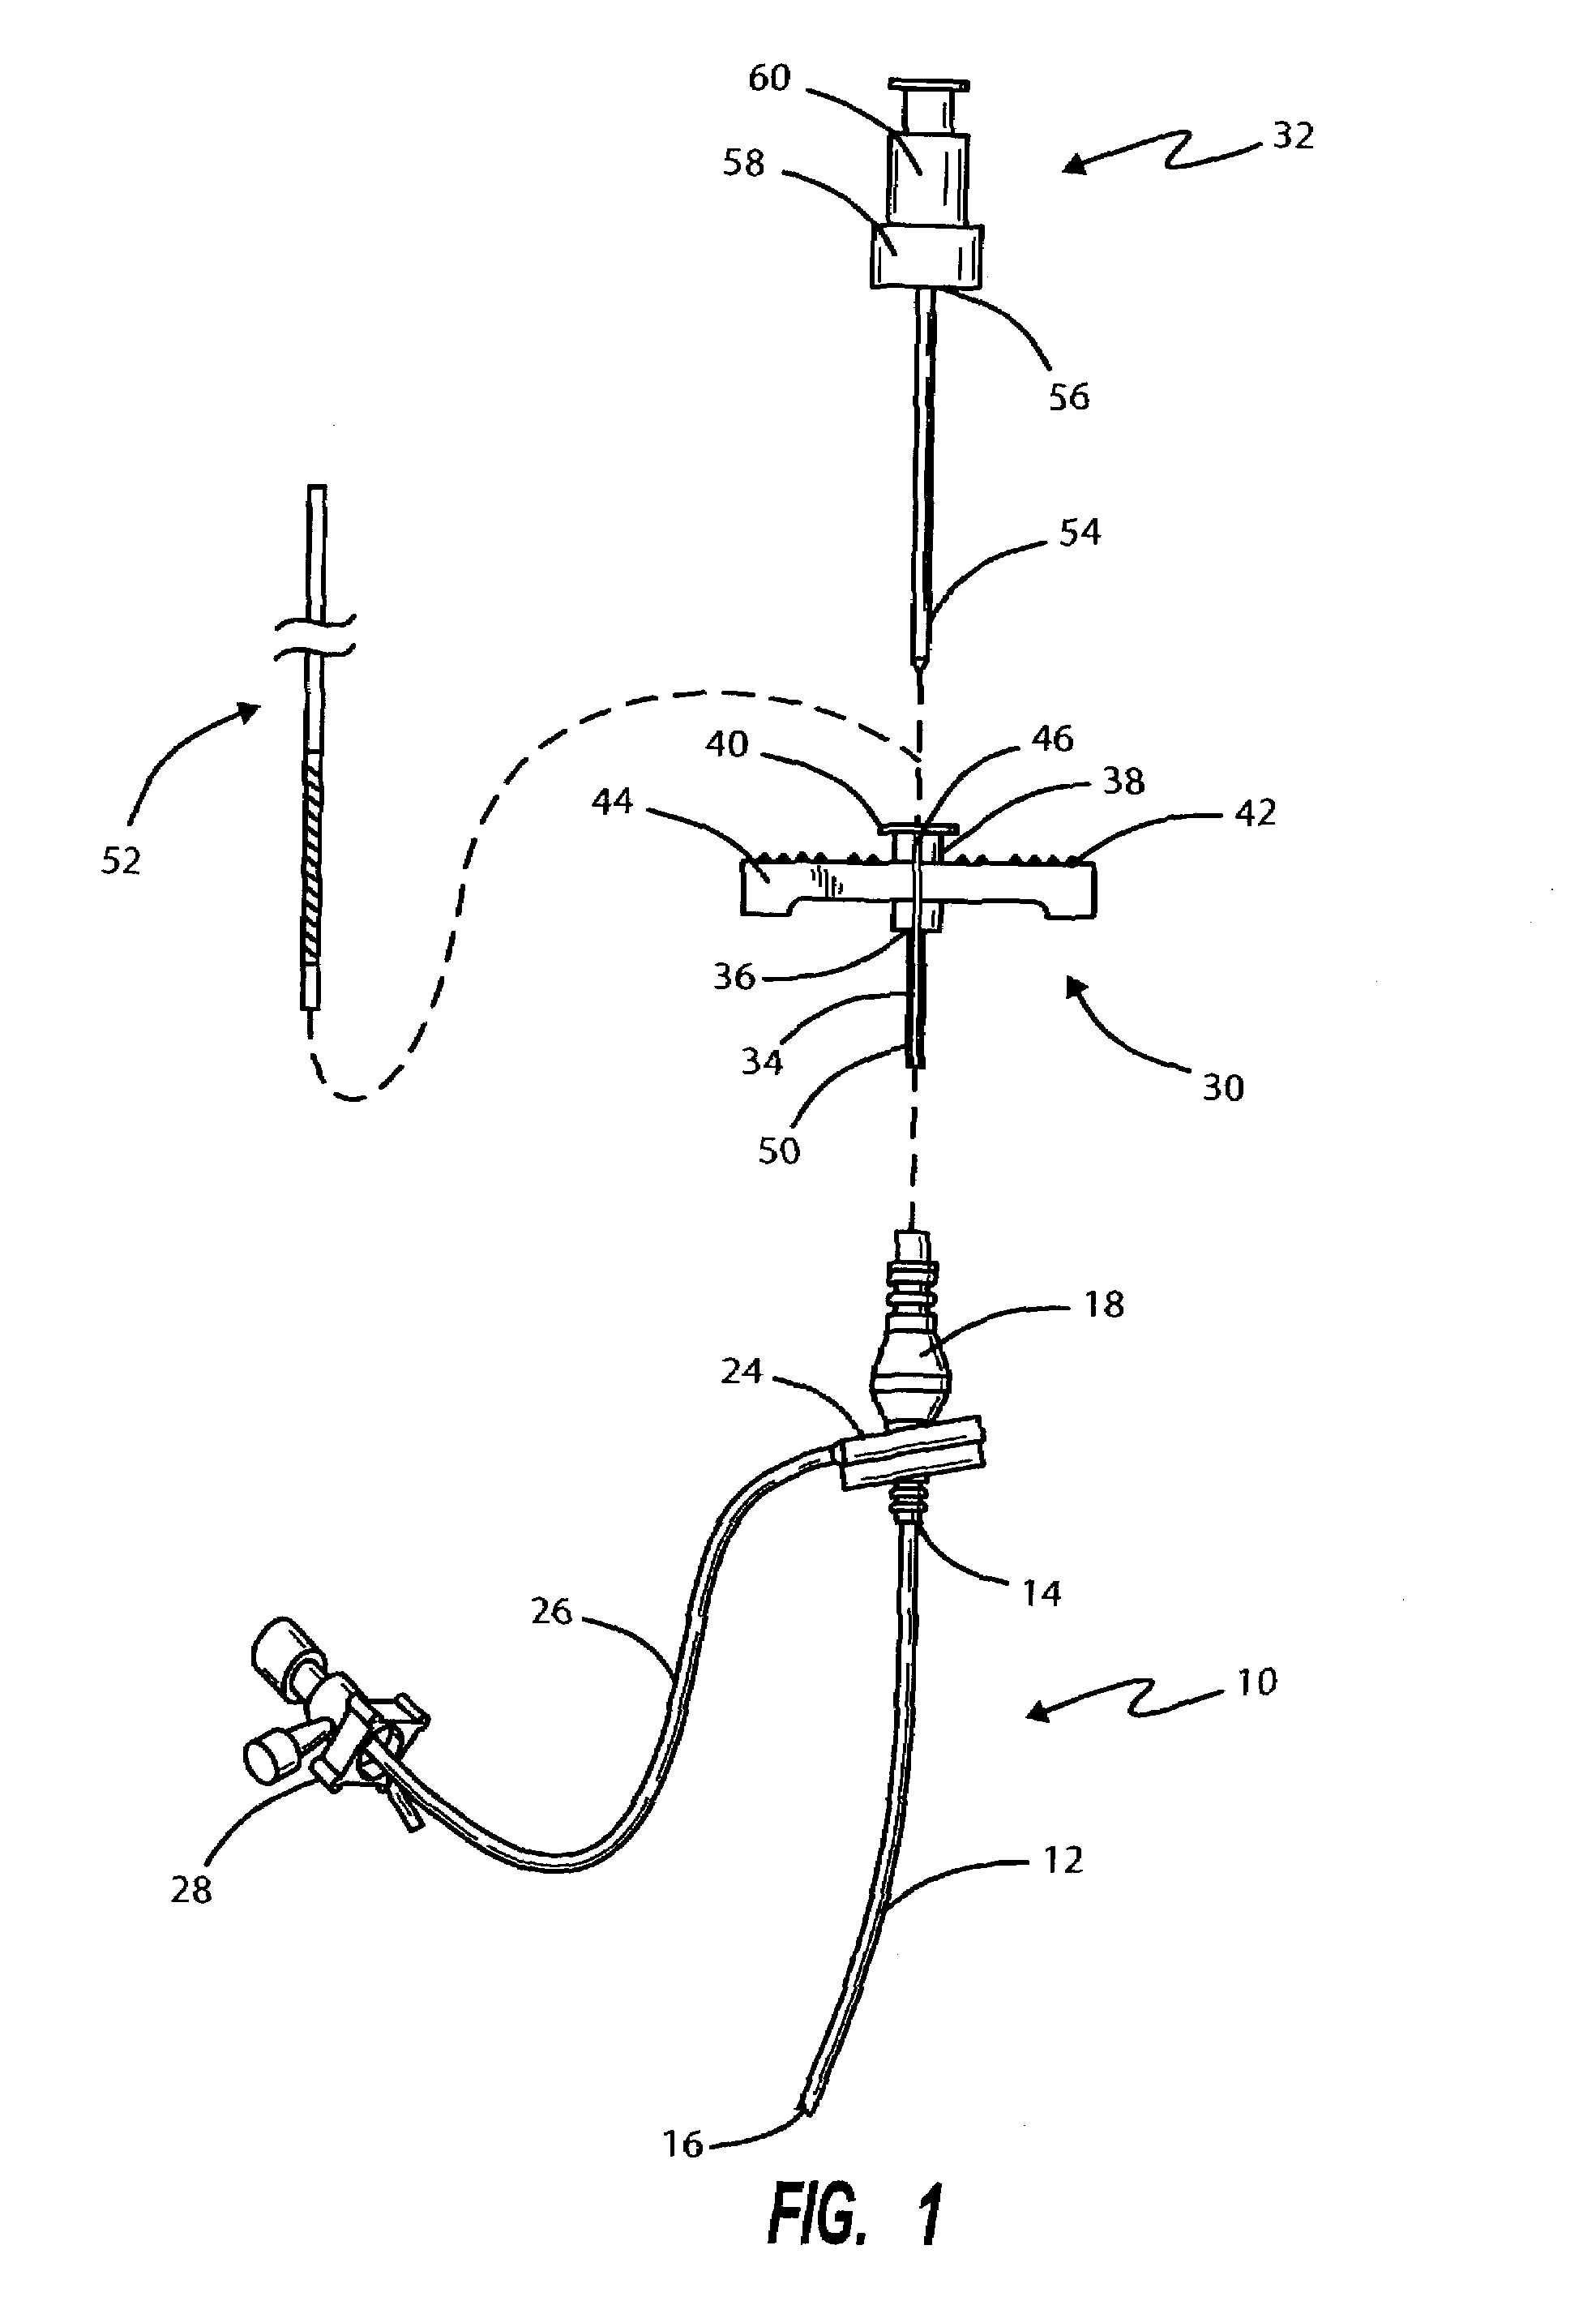 Lead insertion tool for hemostatic introducer system